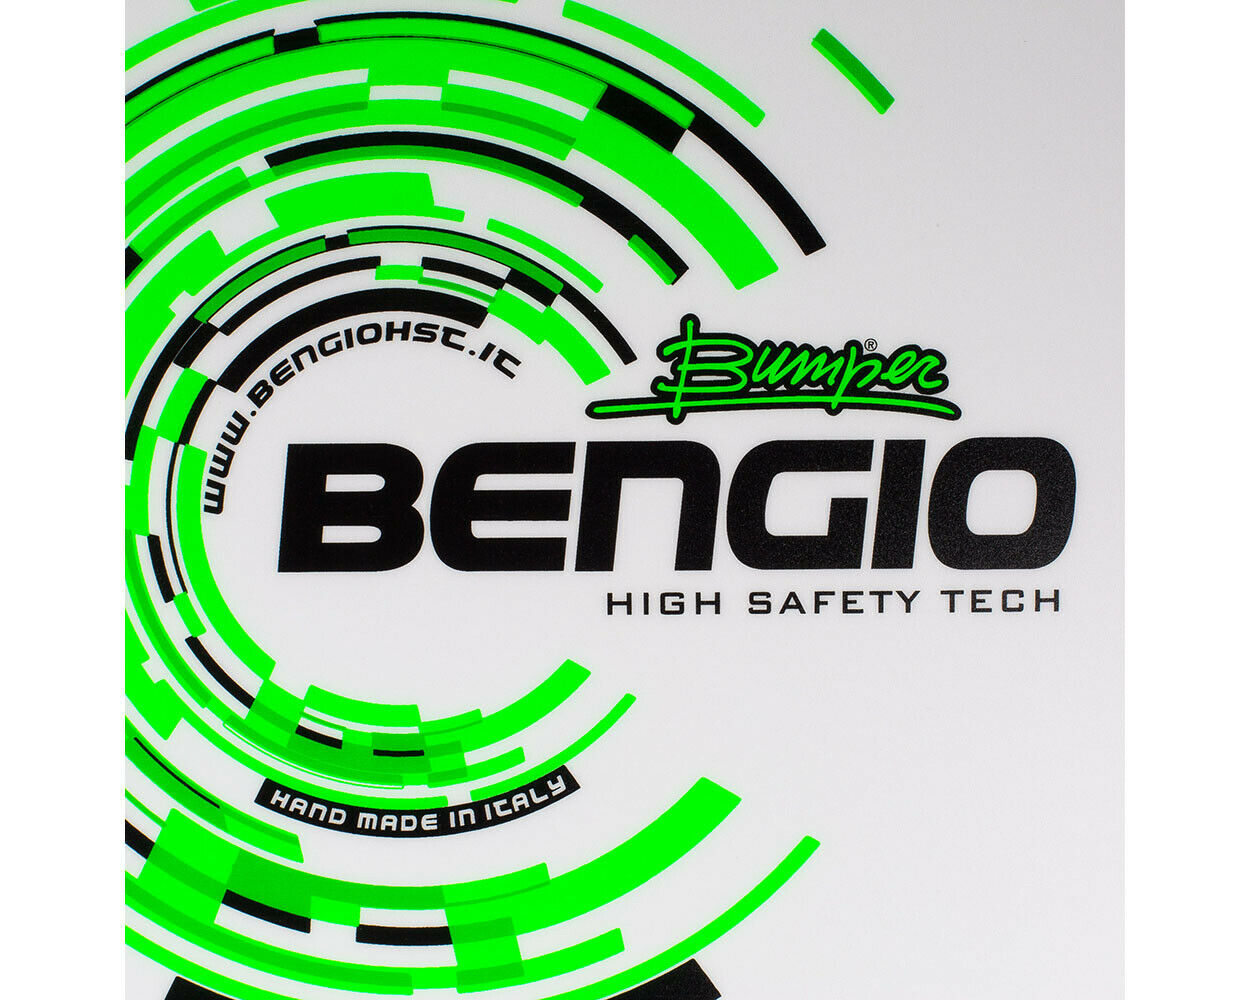 Bengio Bumper High Quality Rib Protector in All Sizes and colours